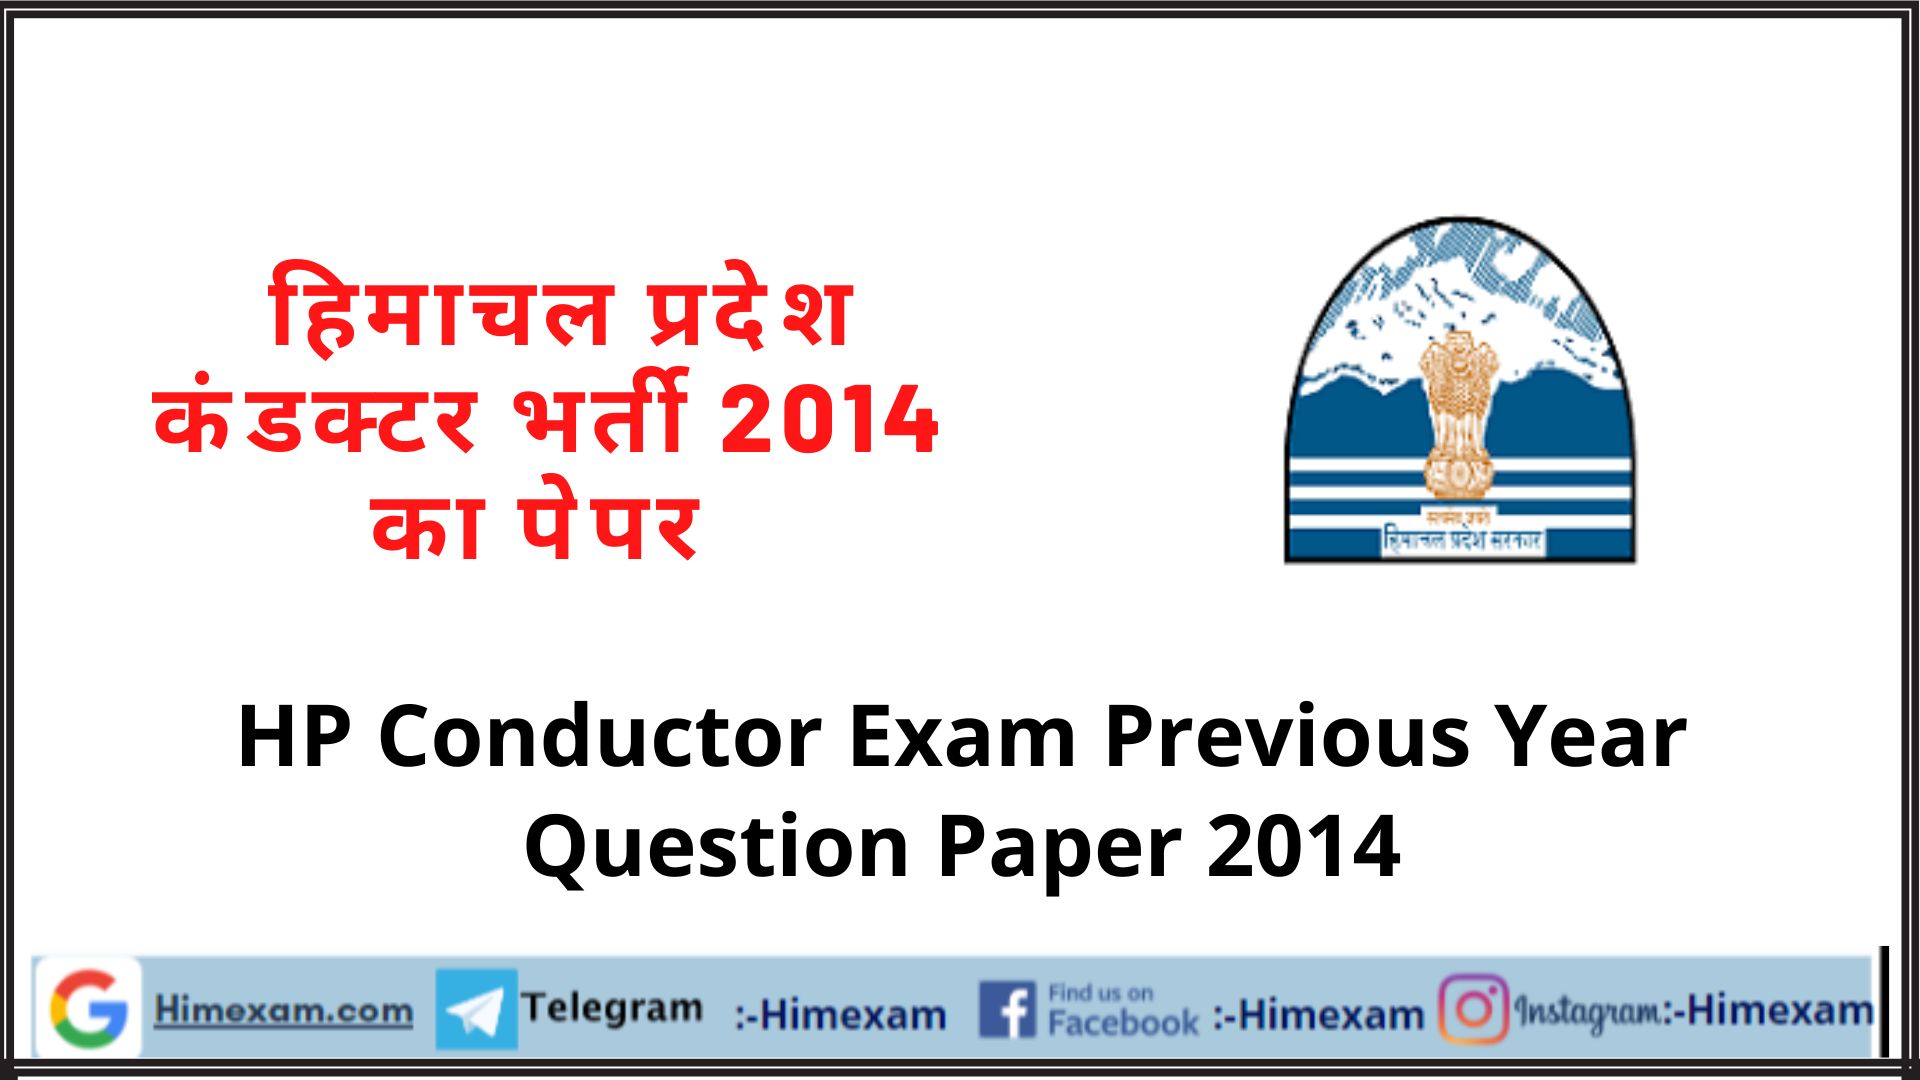 HP Conductor Exam Previous Year Question Paper 2014